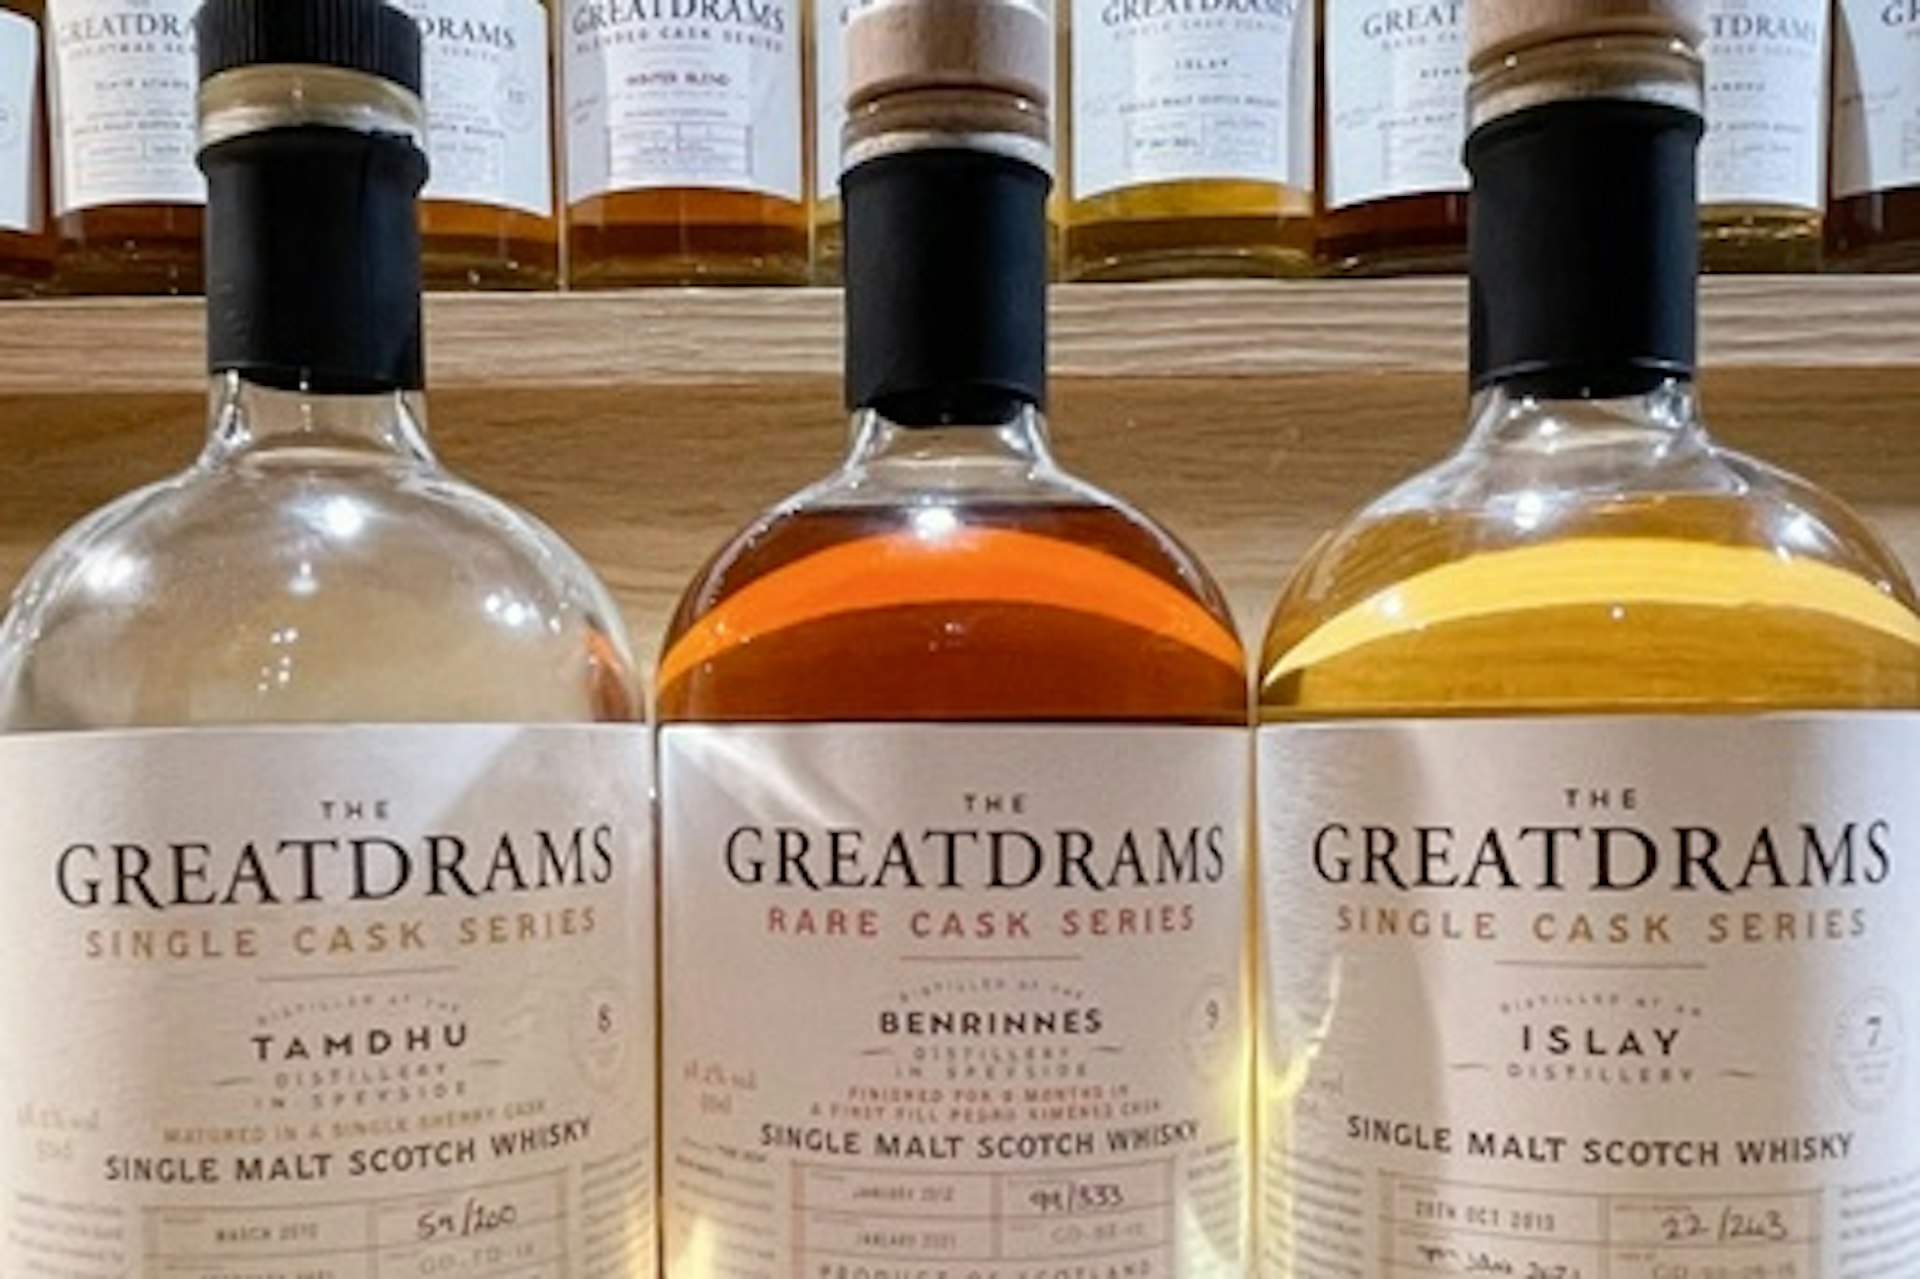 Virtual Whisky Tasting with Great Drams for Two 4